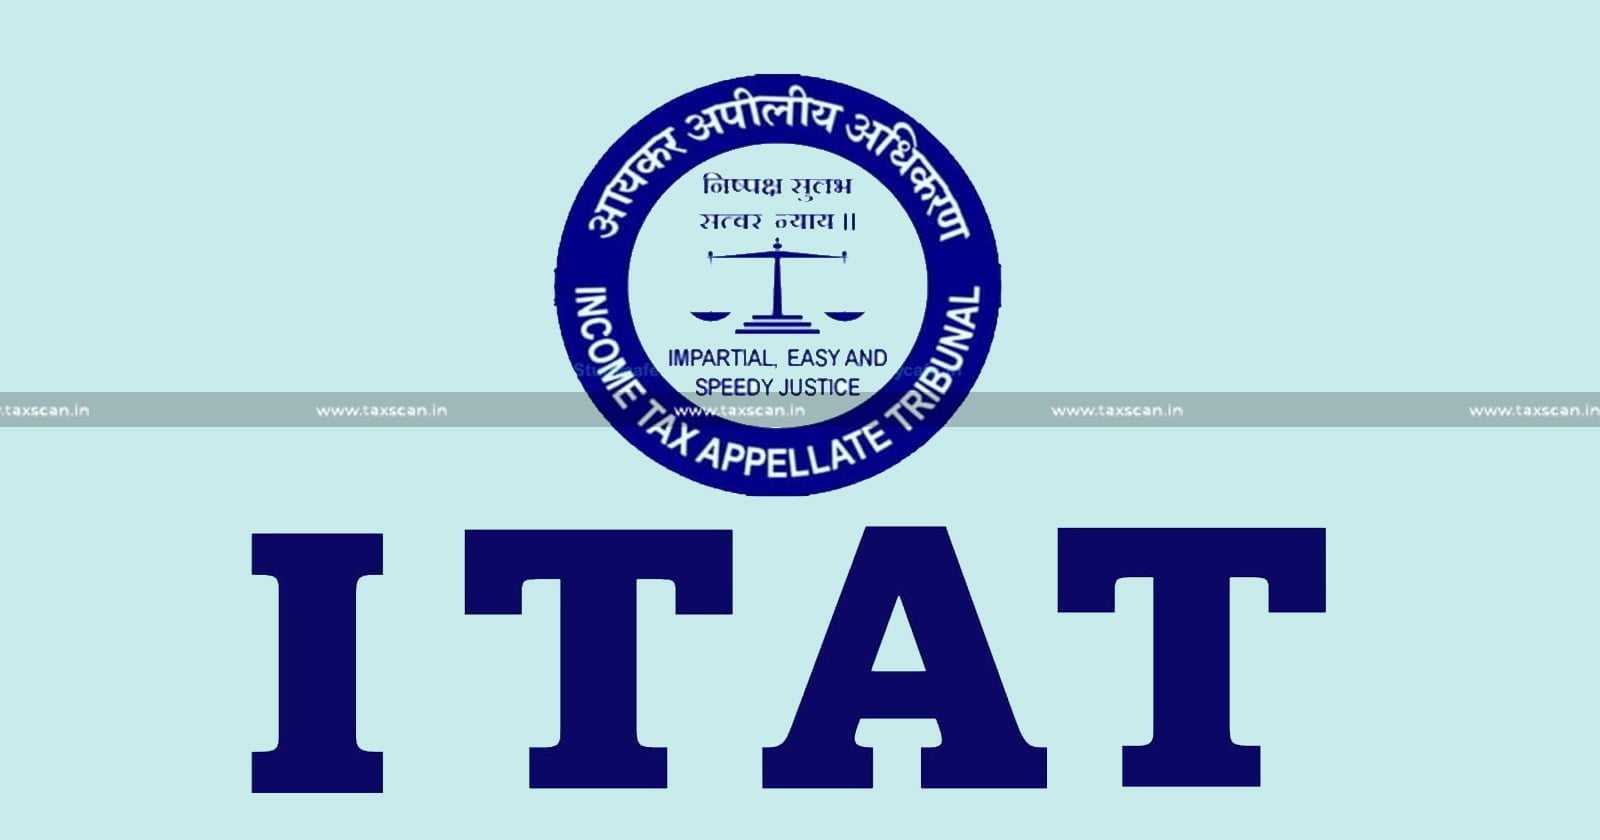 Death of Director - CA of Assessee Company - Assessee Company - Filling Delay Appeal - ITAT - CIT(A) - taxscan